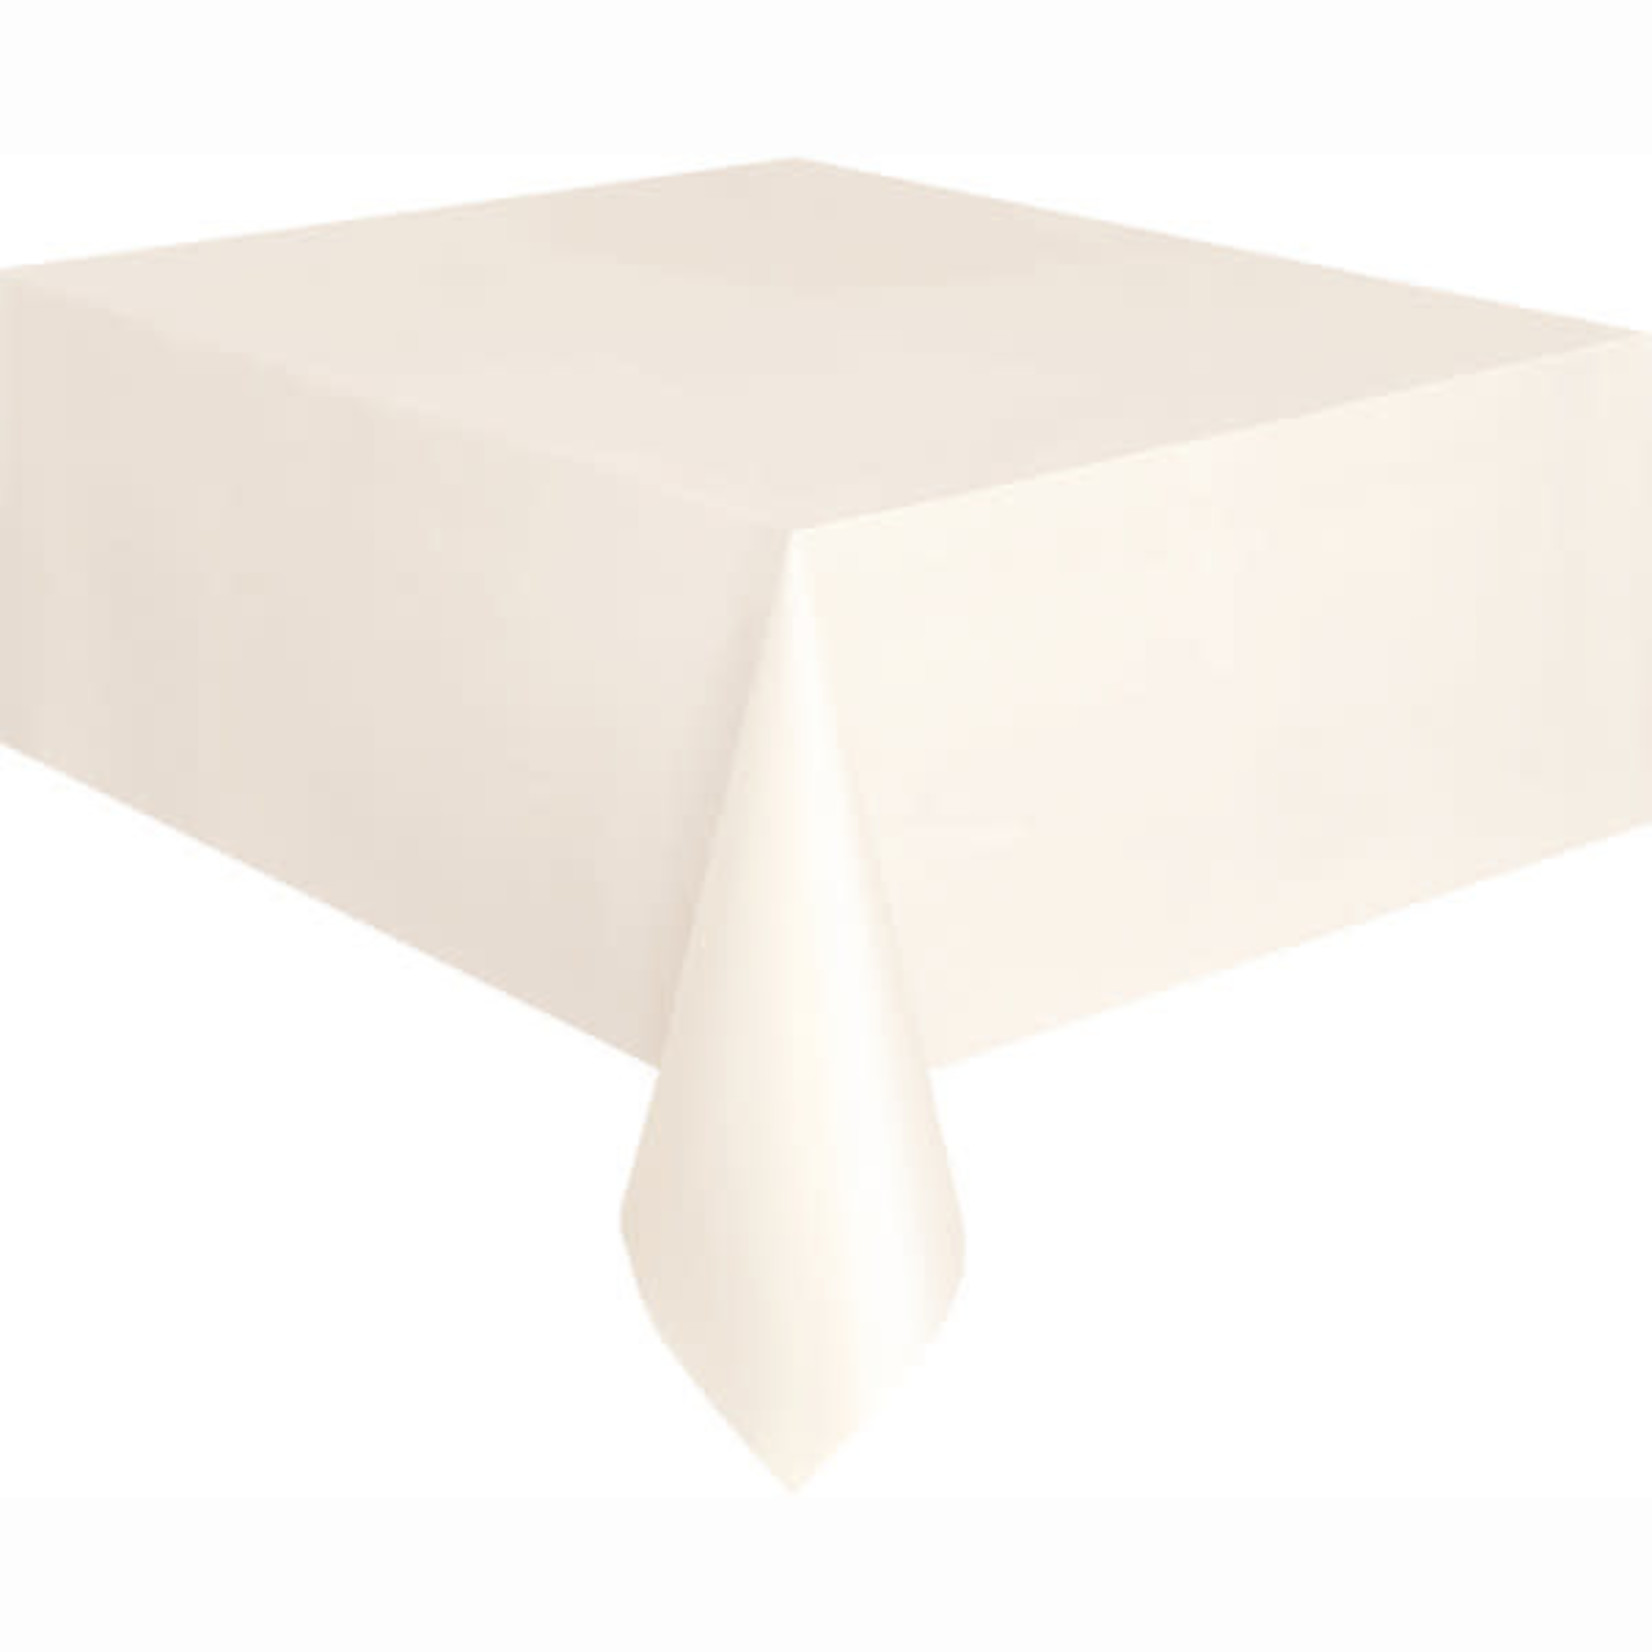 Plastic Tablecover 54""x108"" -Ivory